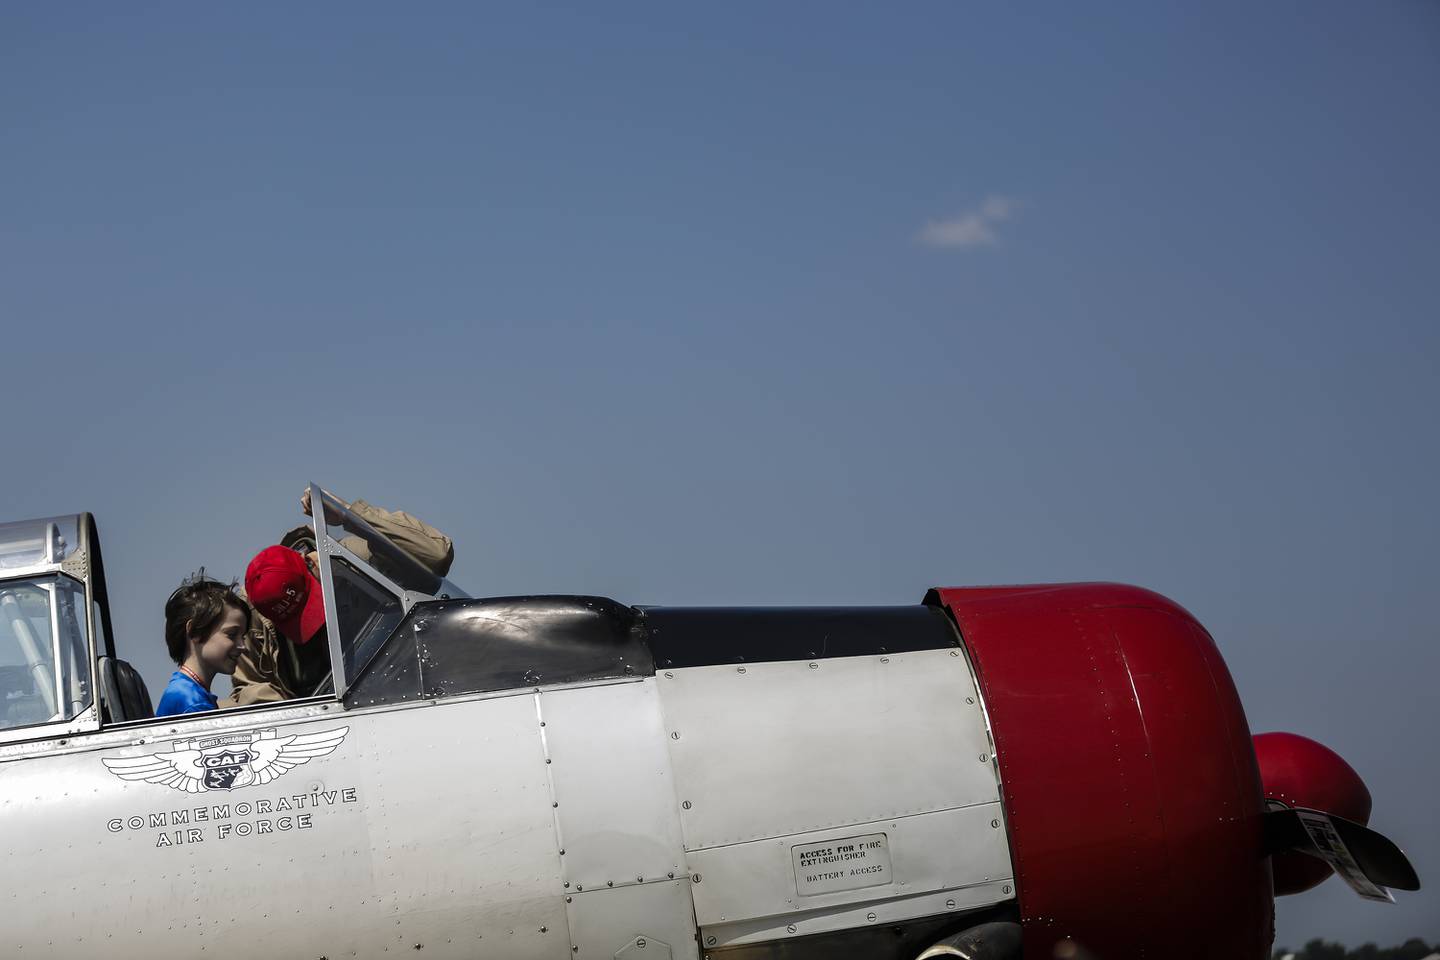 Gary Otto (right) shows Eric Boyce, 11, of Geneva, the cockpit of a SNJ-5 during the 2014 Scout AirFest at Lewis University Airport in Romeoville on Saturday, Aug. 9, 2014.